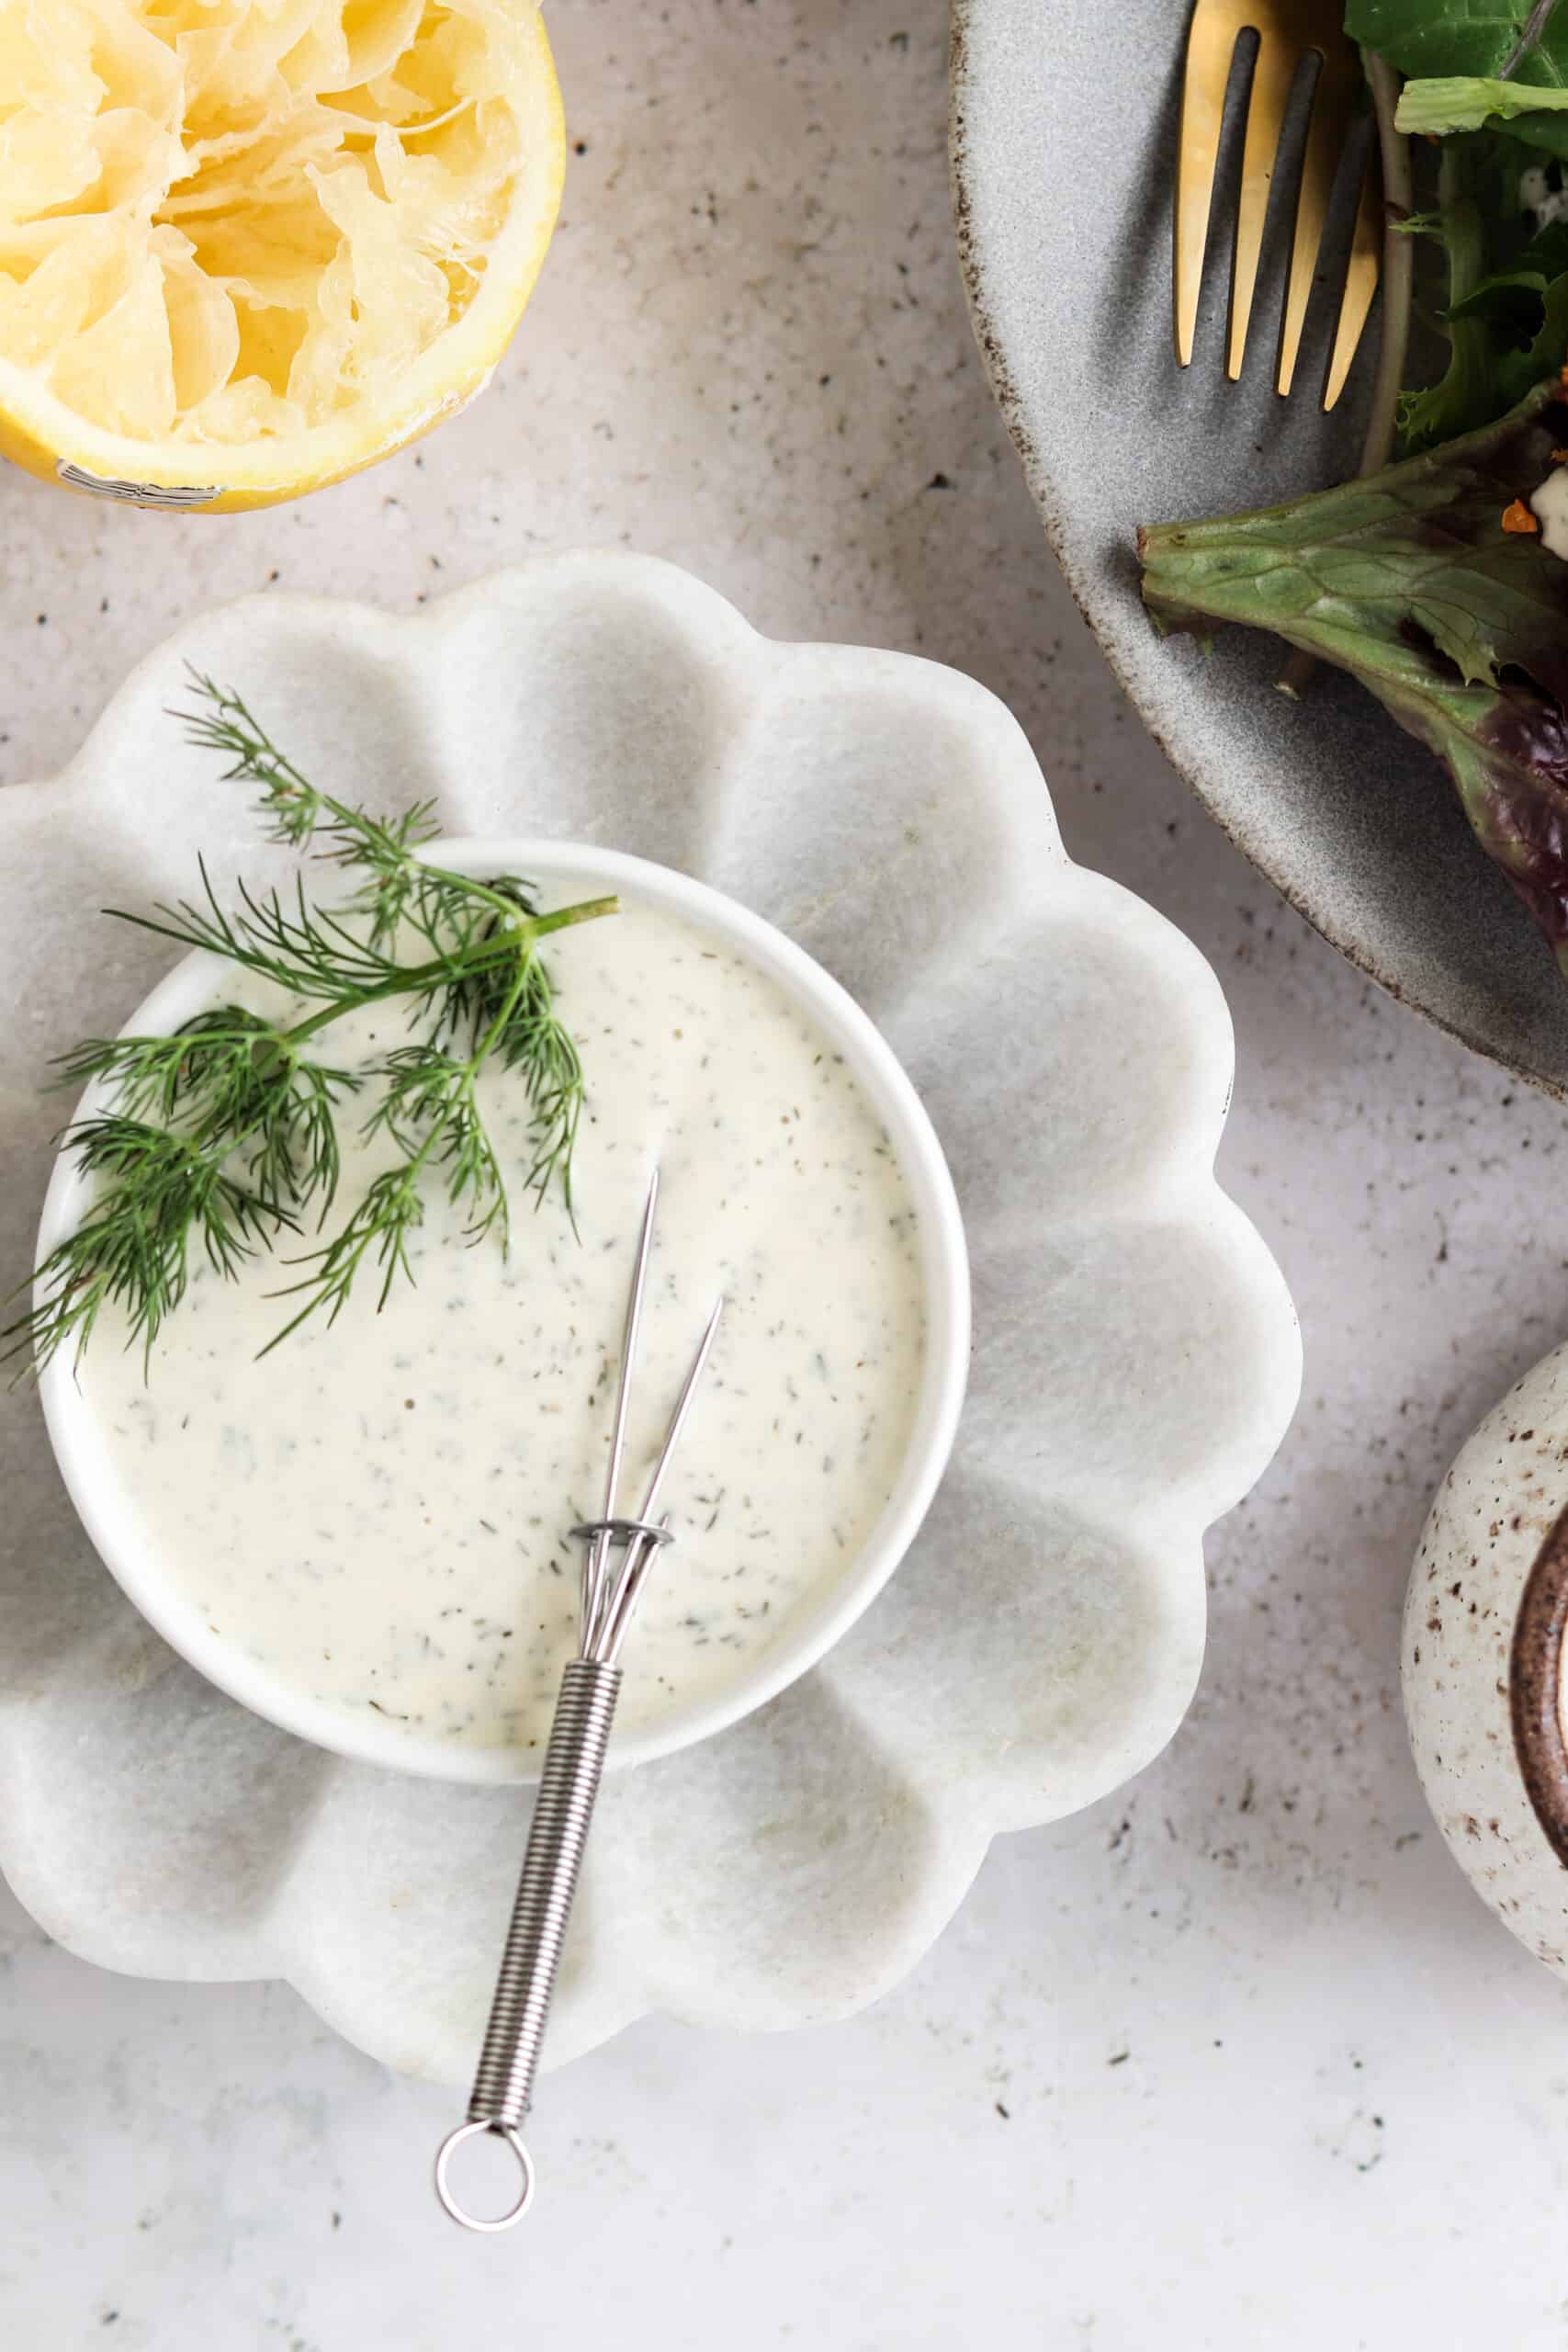 Dill aioli in a bowl with fresh dill and lemon juice.